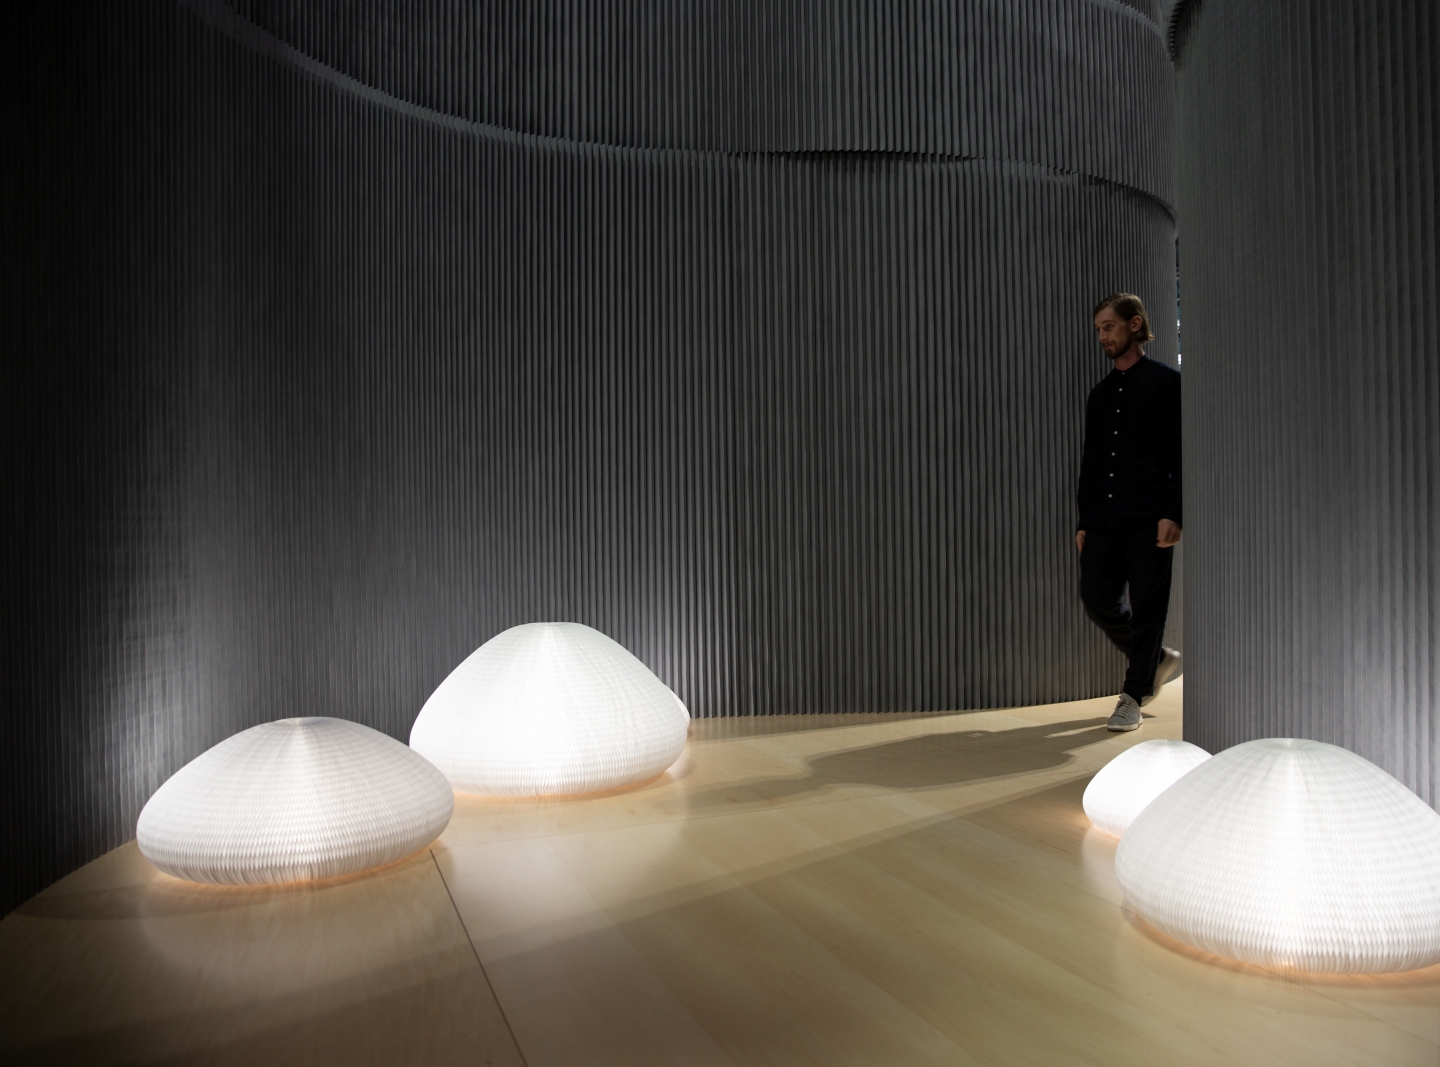 Inside a room made from softwall, a man examines molo's flexible lamps, wall partitions